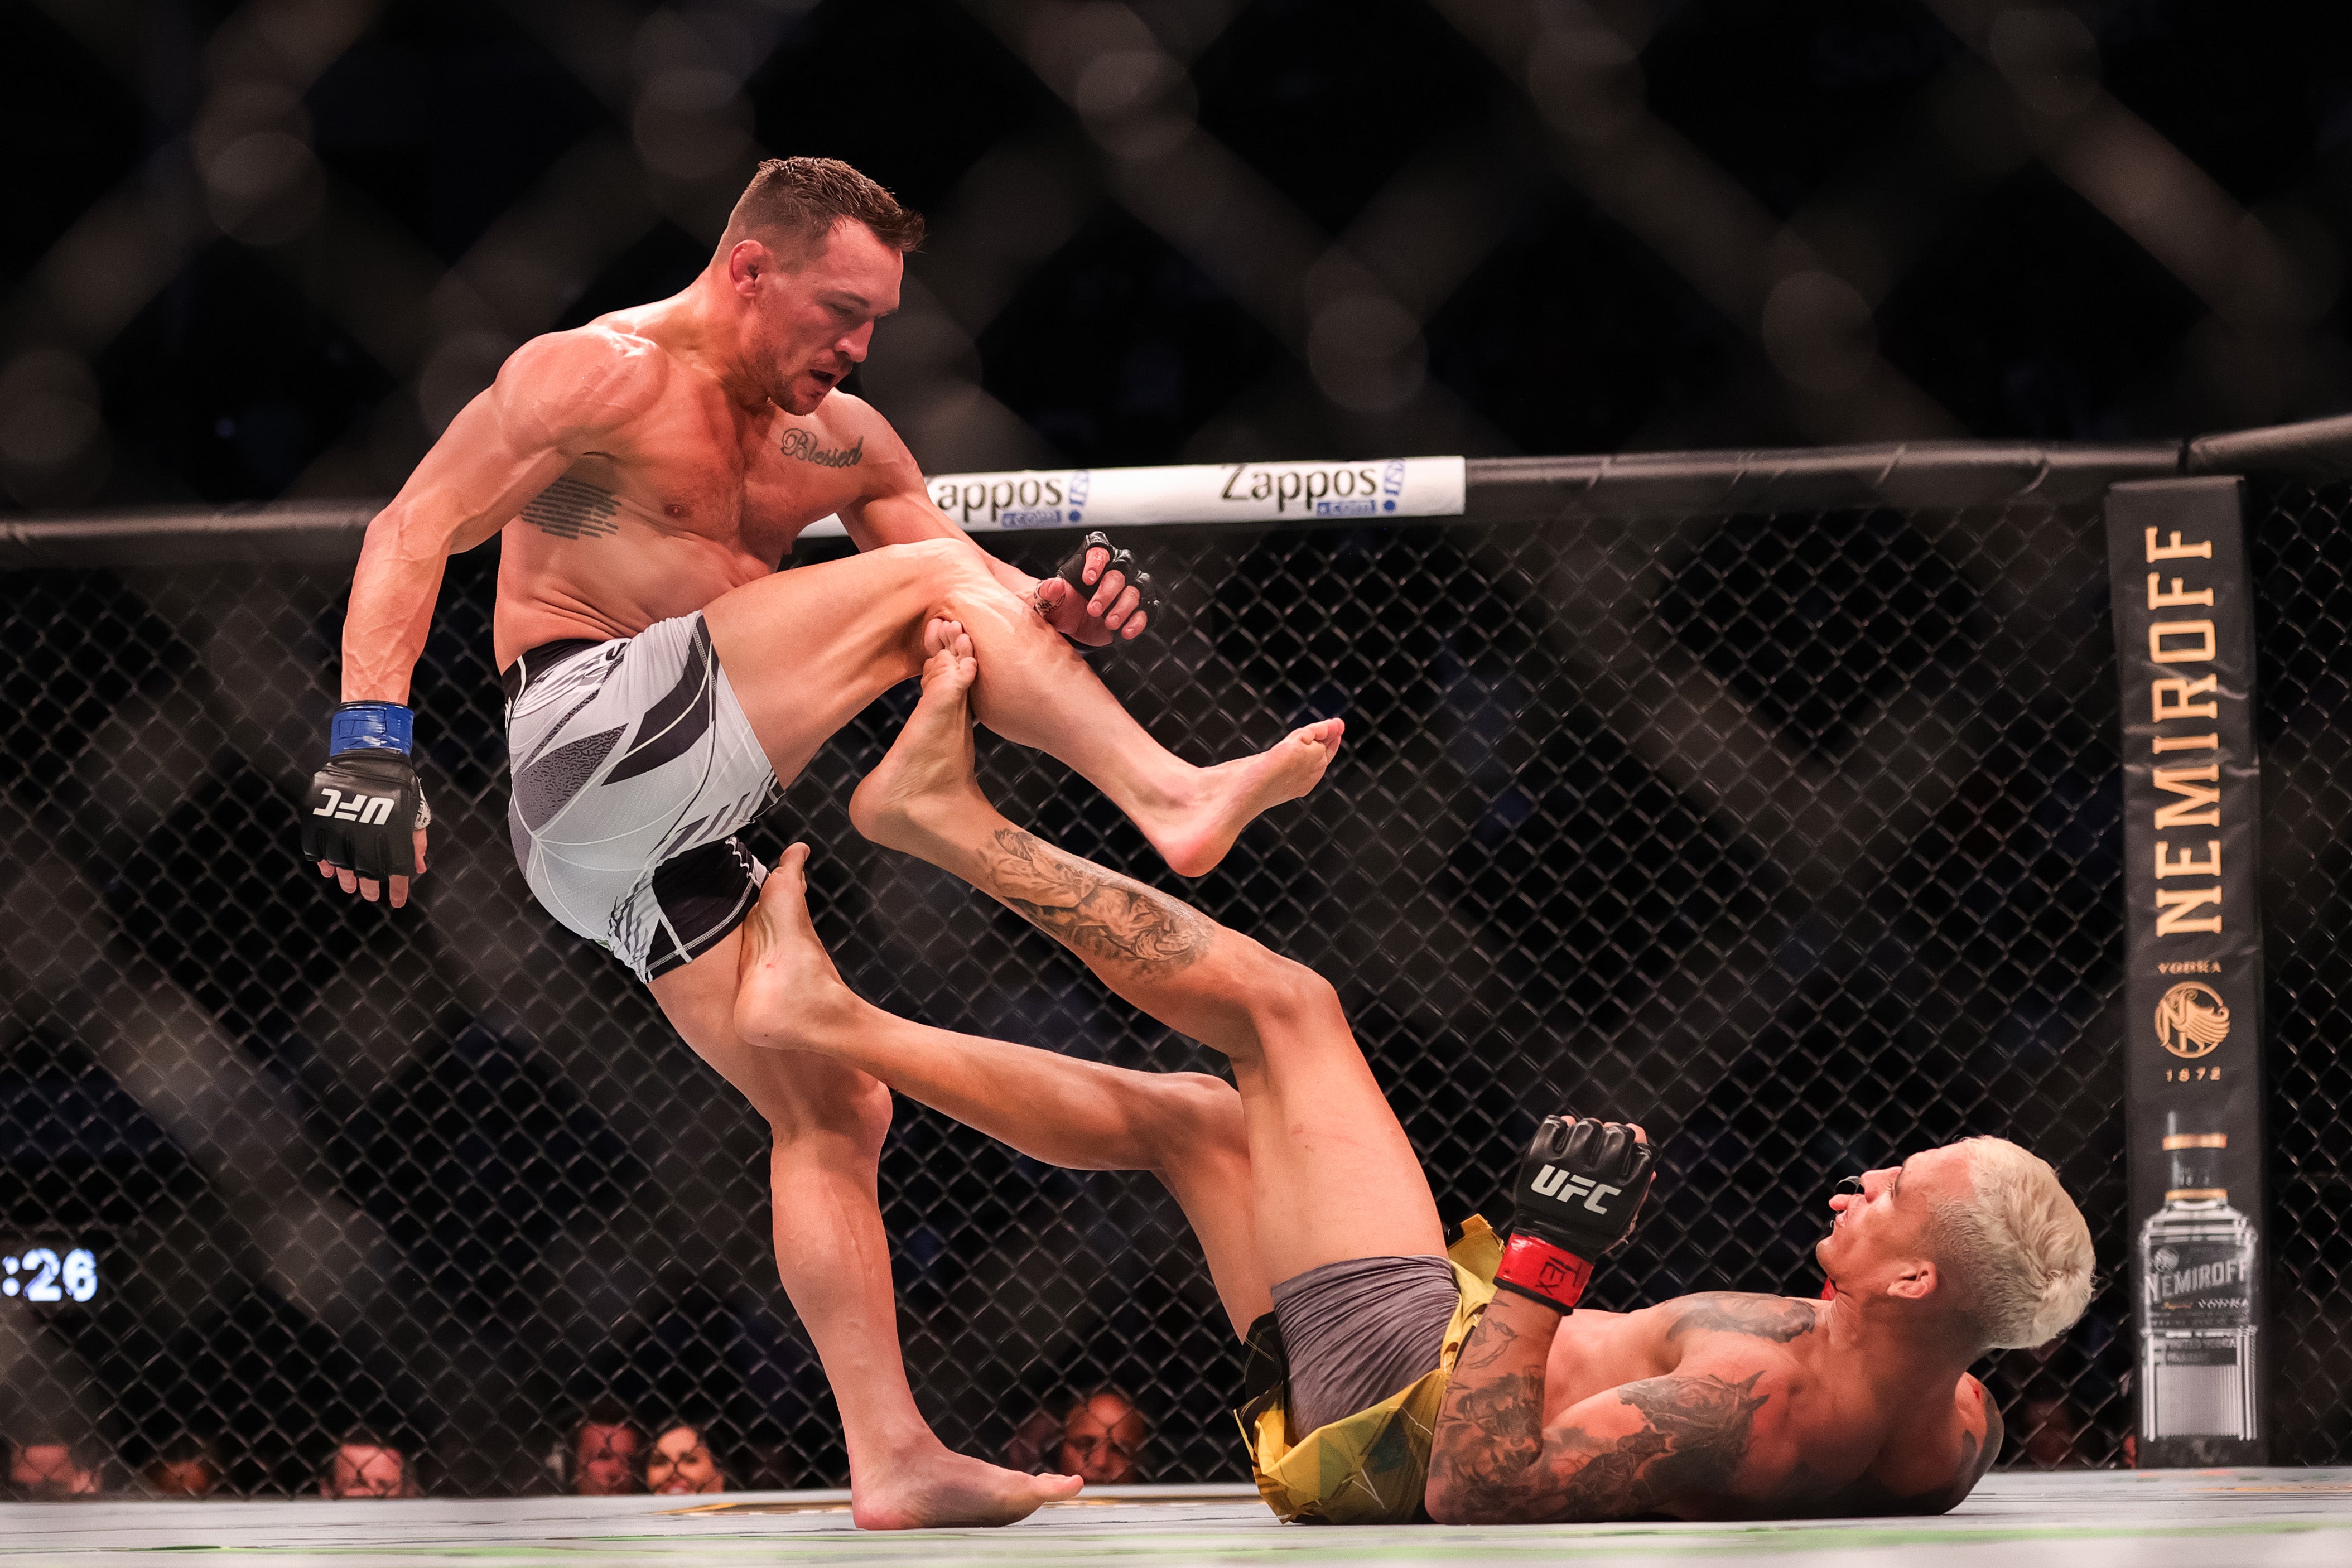 Chandler came close to finishing Oliveira at UFC 262 but was knocked out in the second round